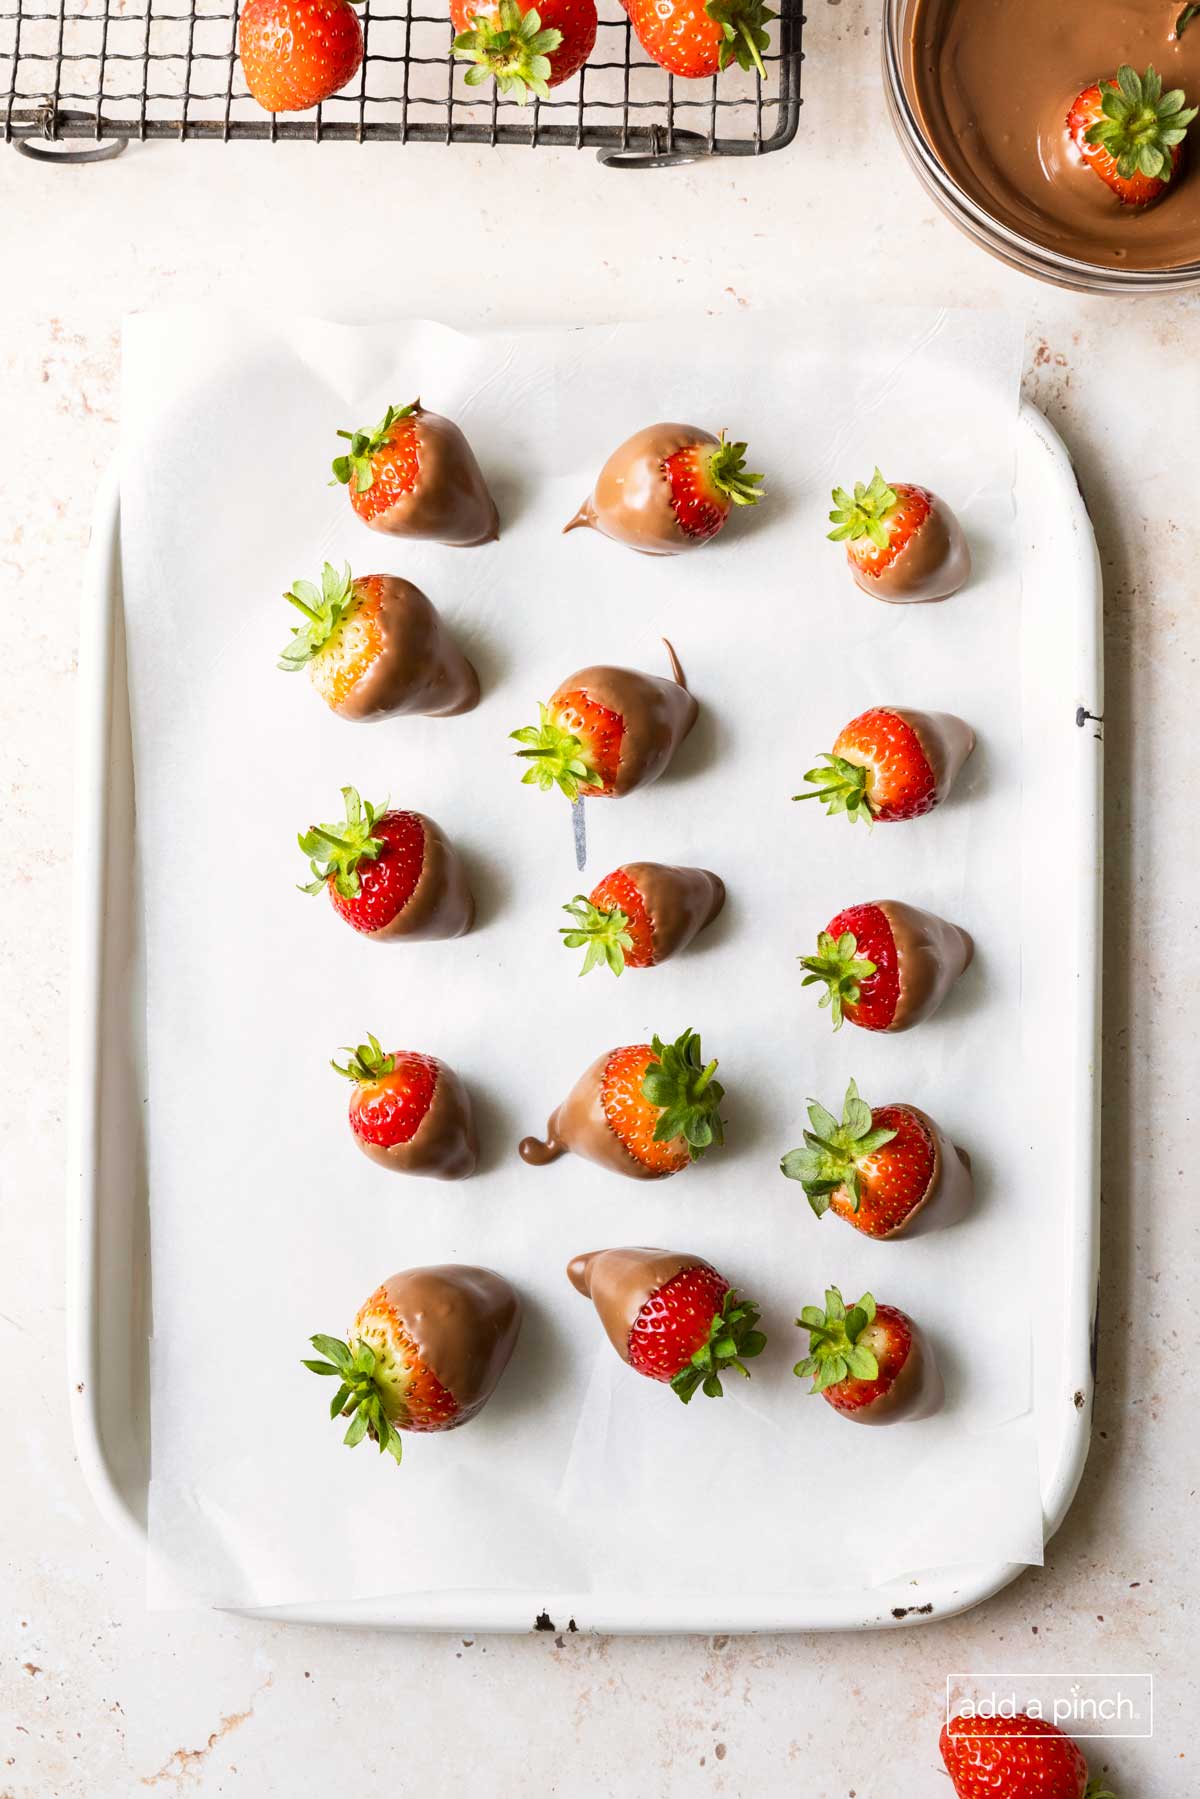 Platter lined with parchment paper and filled with strawberries dipped in chocolate drying.